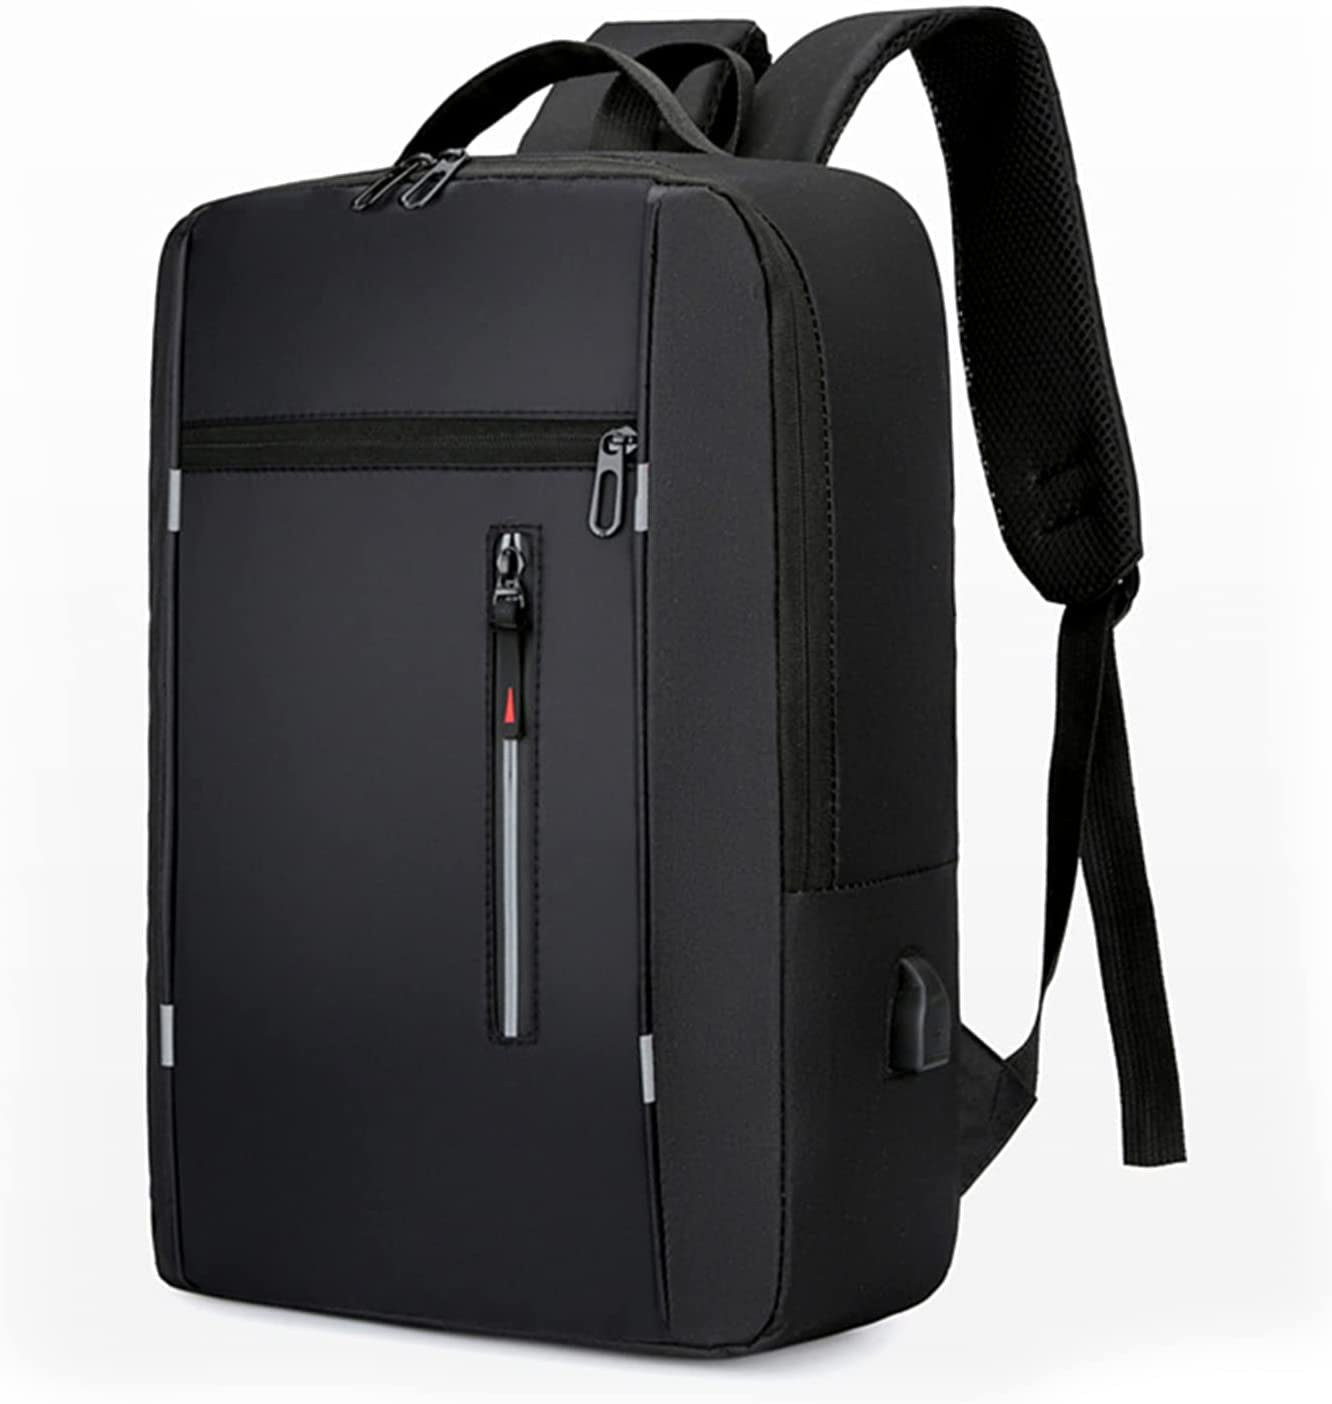 Laptop Backpack with USB Charging Port for Men & Women Fits 15.6 Inch Notebook. College School Book Bag Computer Backpack for Boys Girls